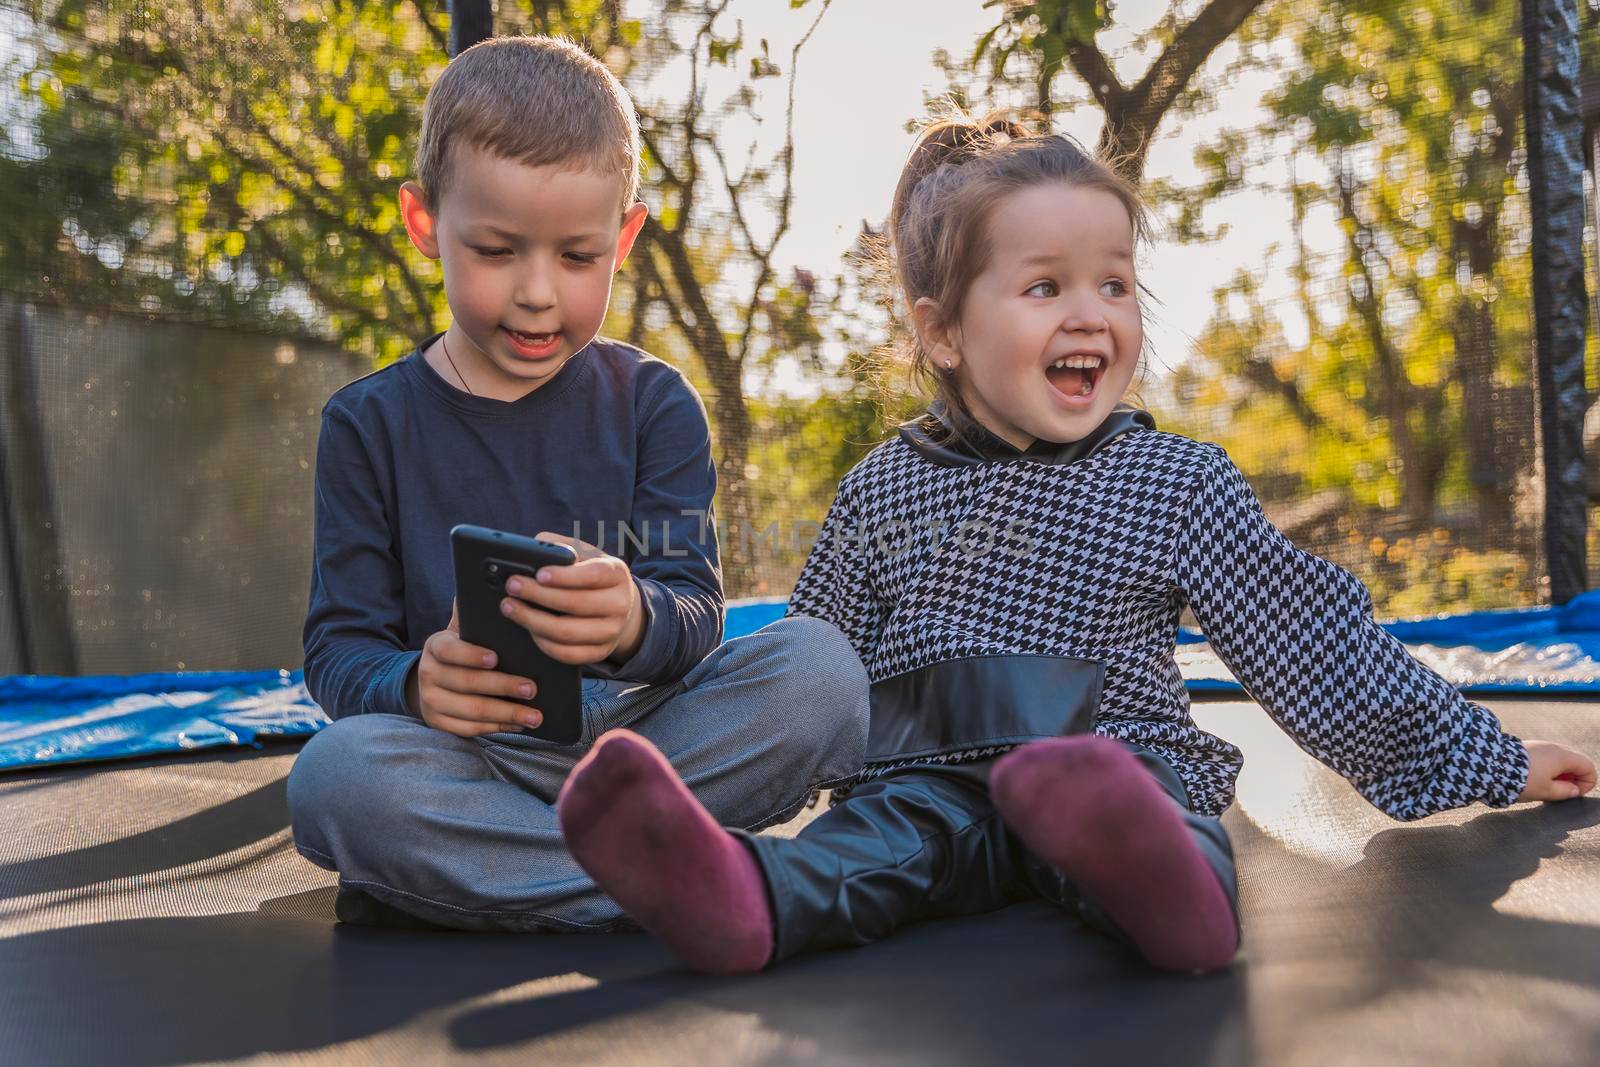 children sit on a trampoline and look at the phone